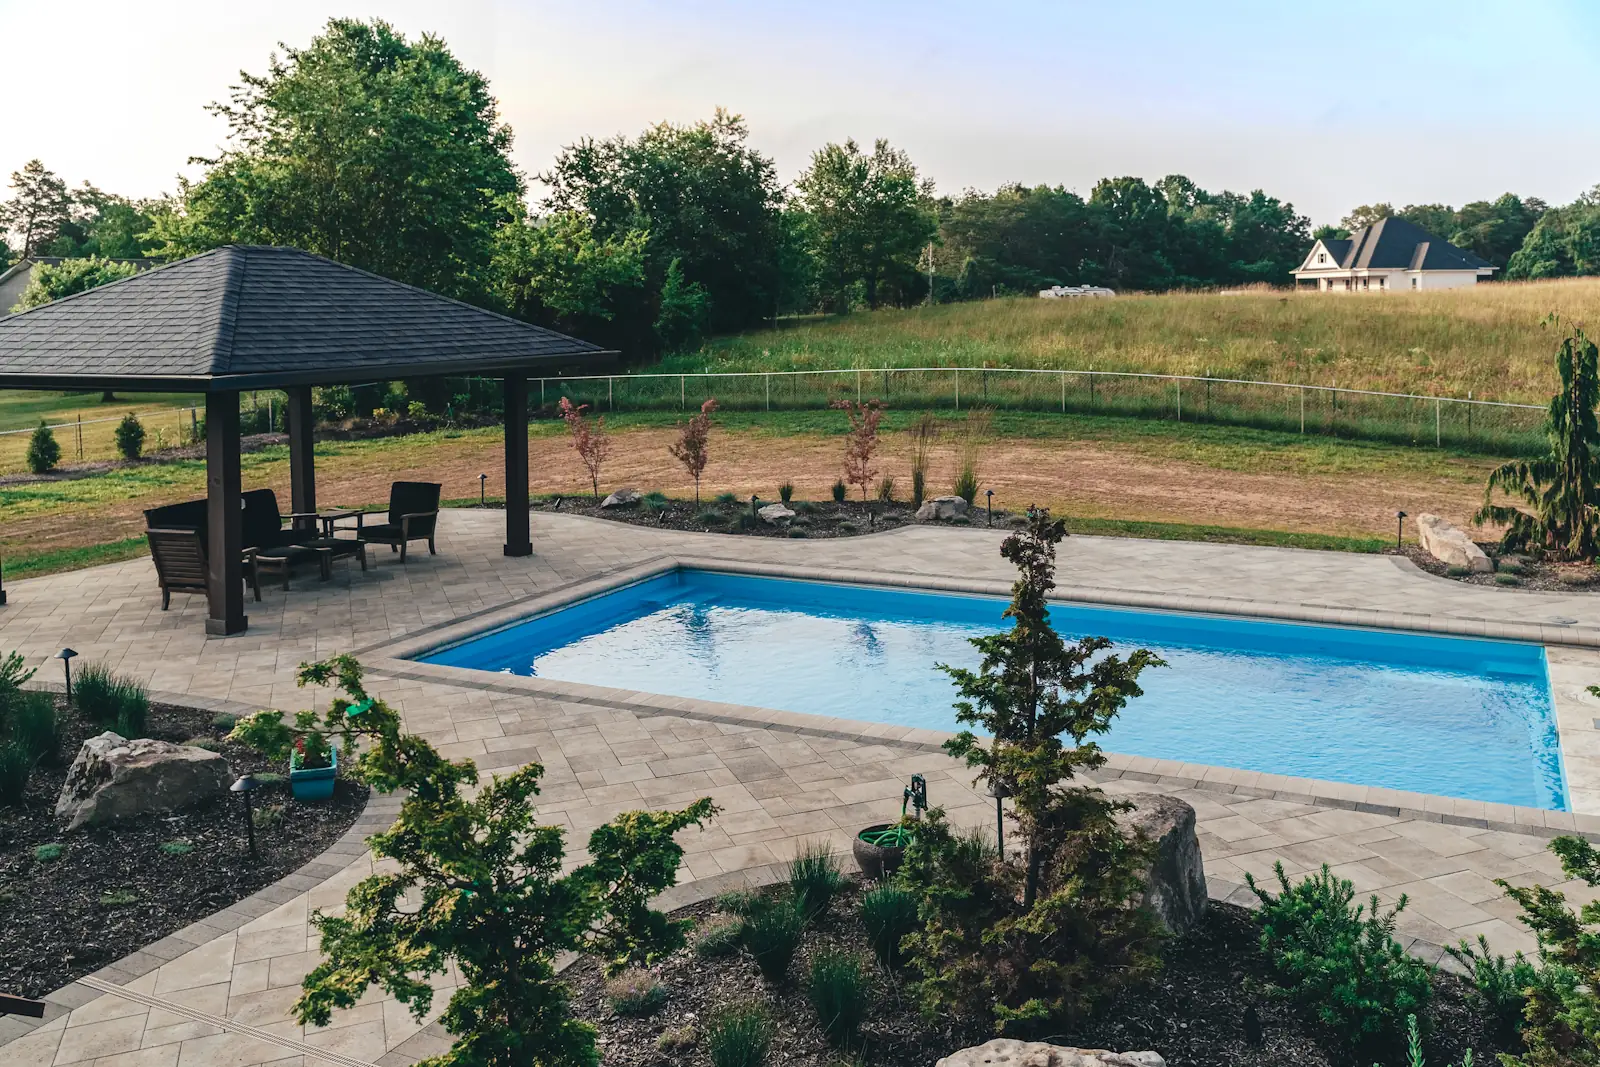 Loy's Pools is a fiberglass pool builder in Knox County, Tennessee